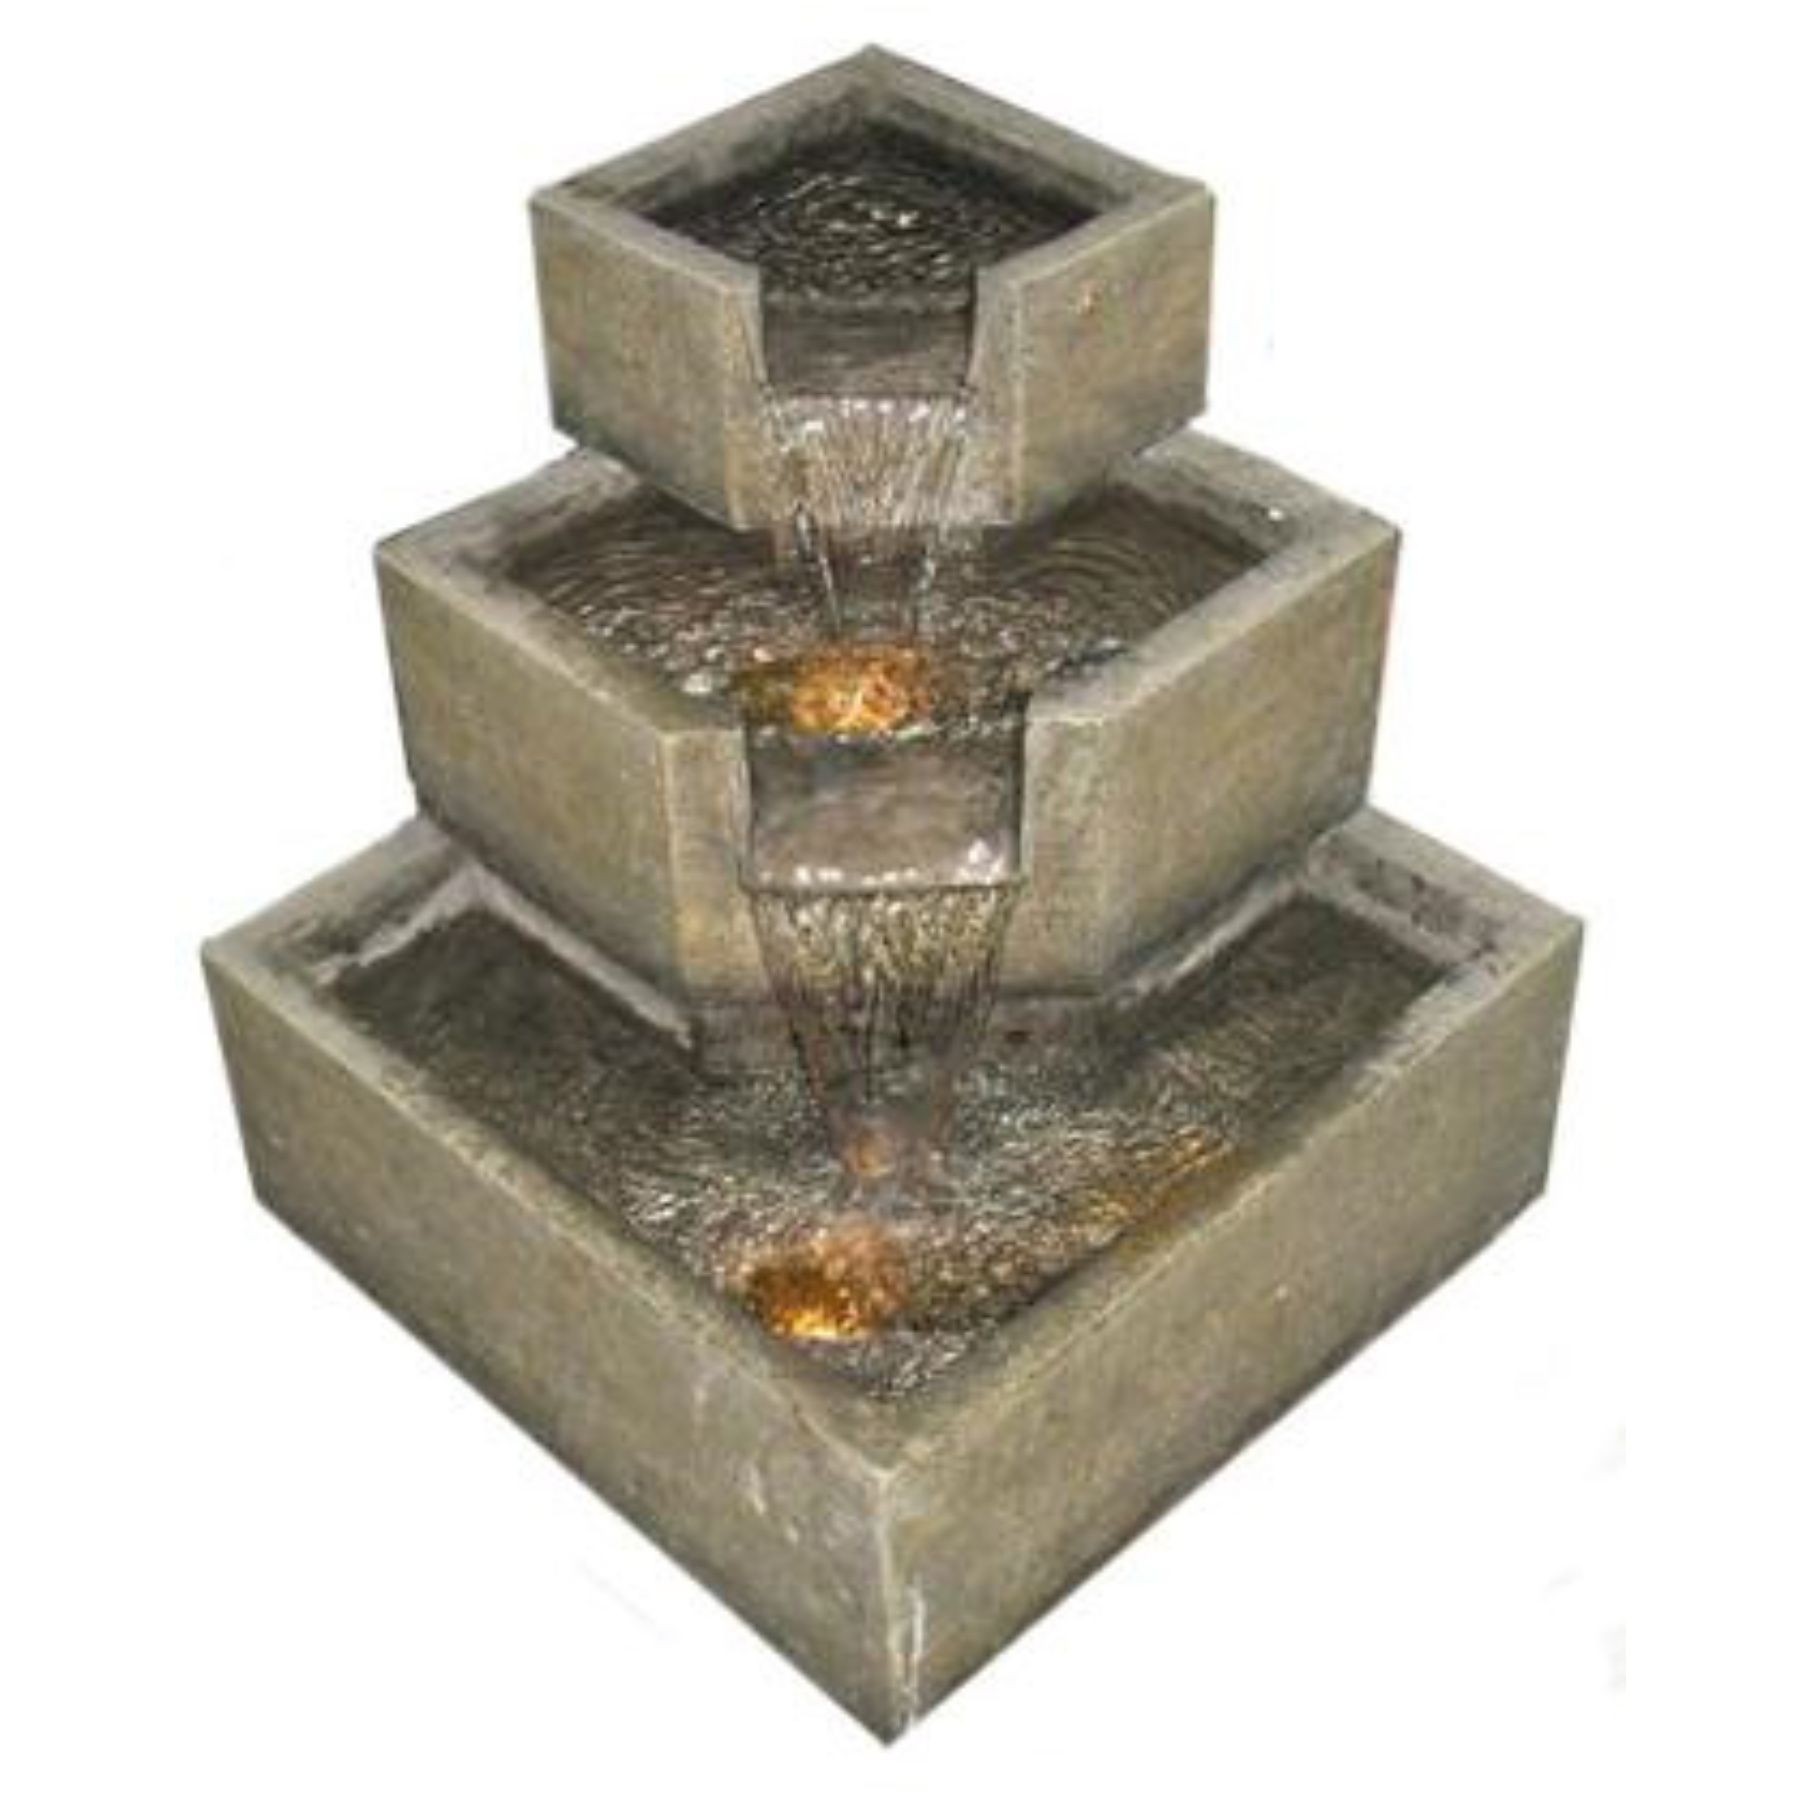 Outdoor Corner Fountains - Ideas on Foter